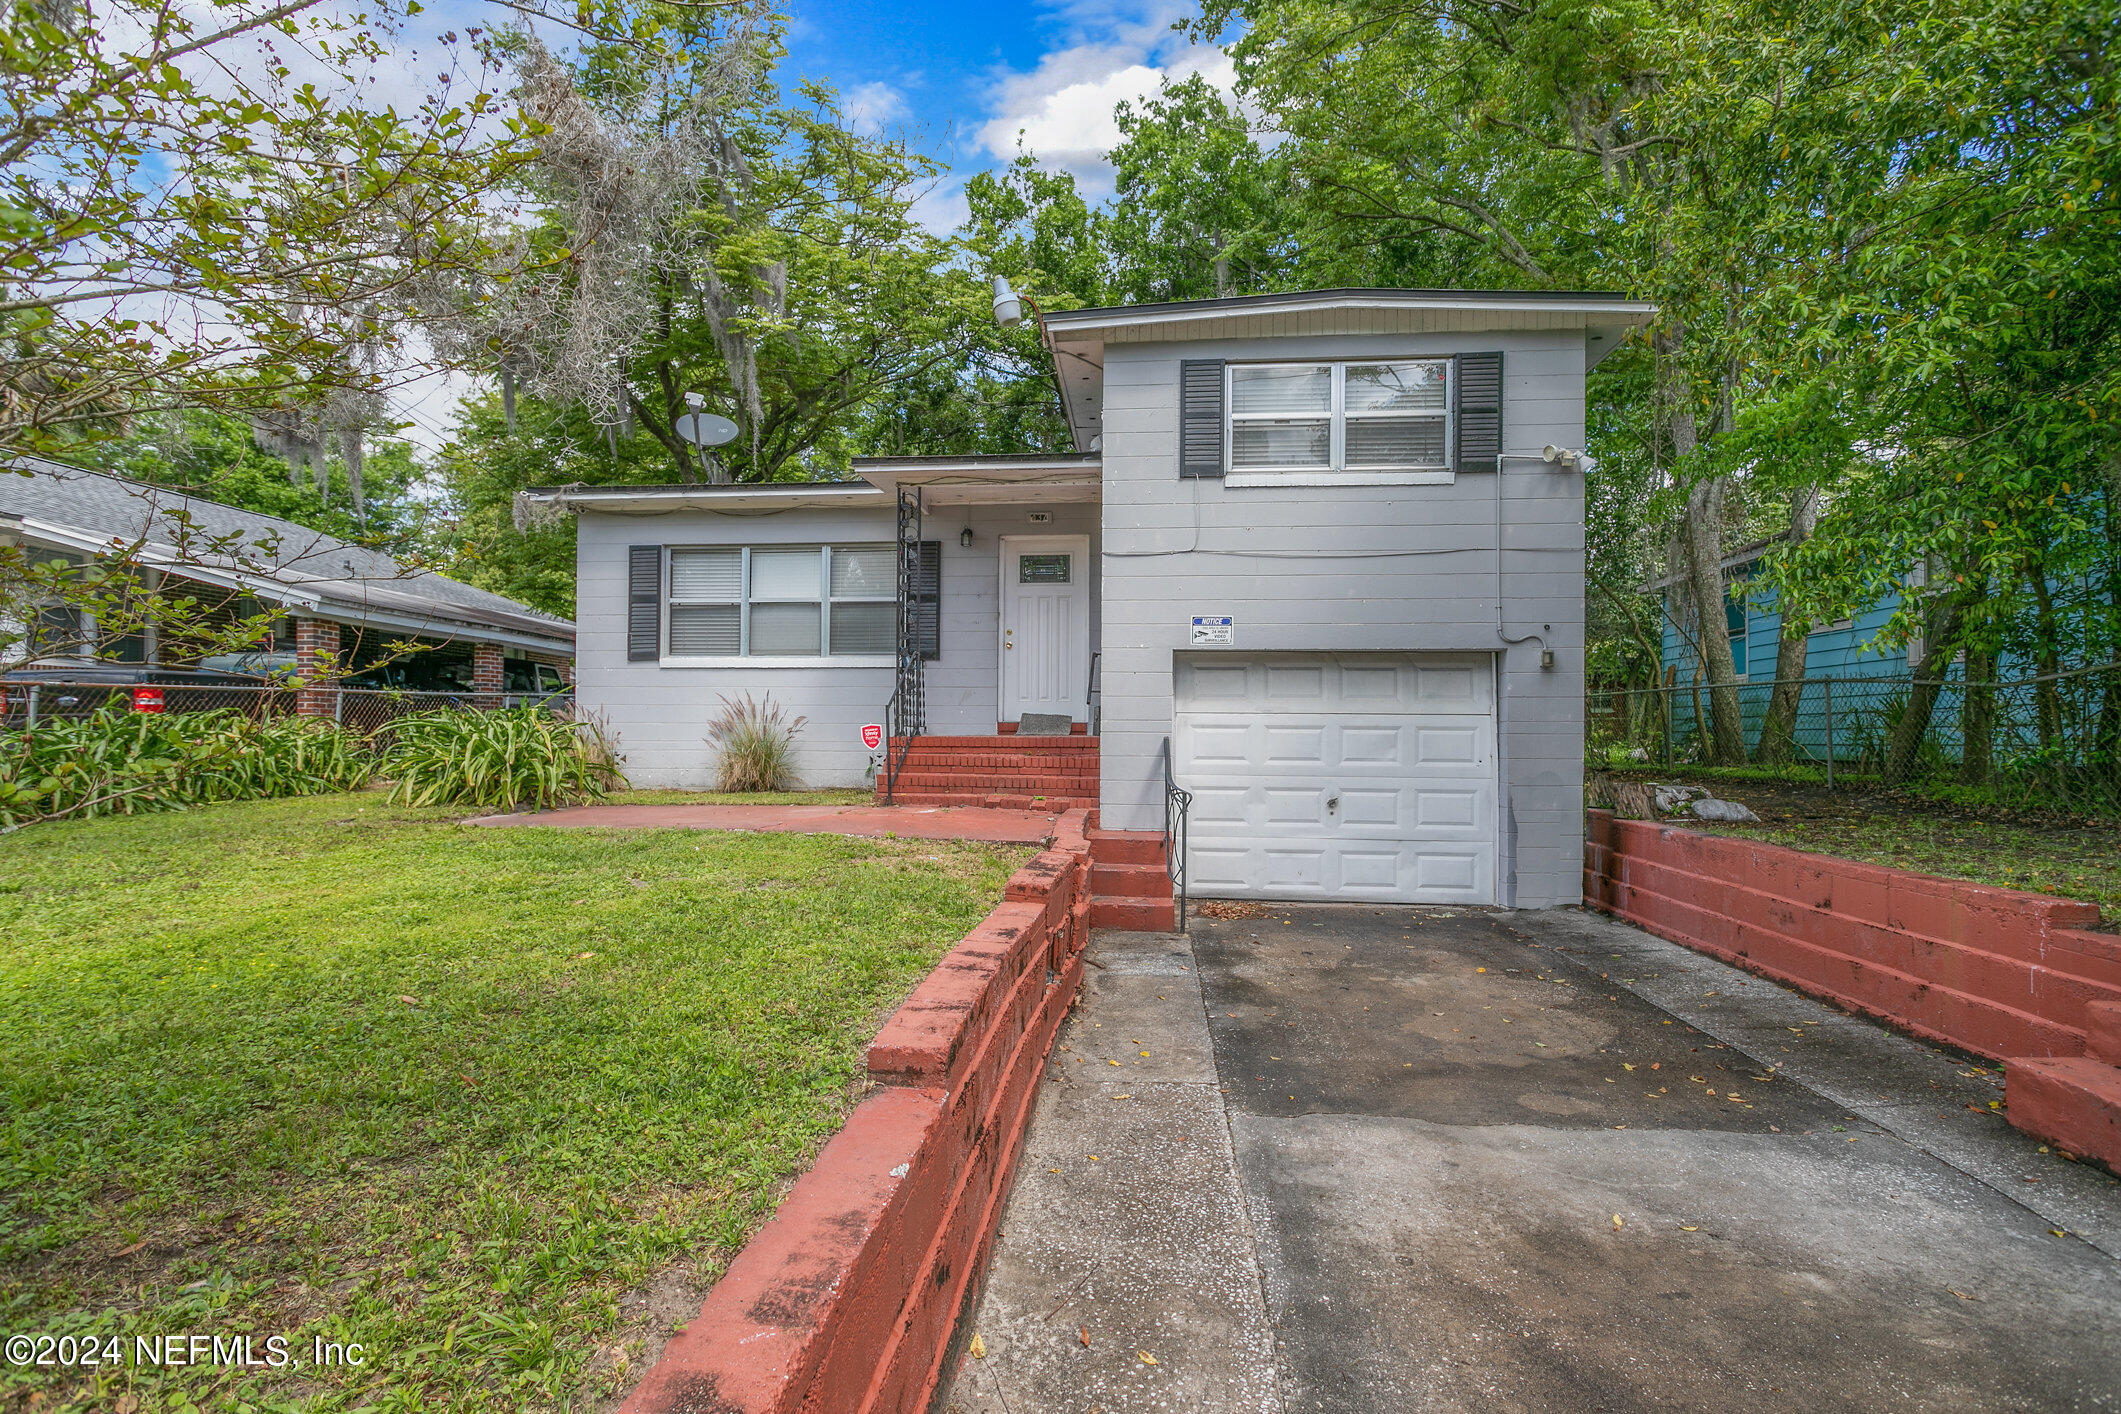 Jacksonville, FL home for sale located at 437 W 62nd Street, Jacksonville, FL 32208